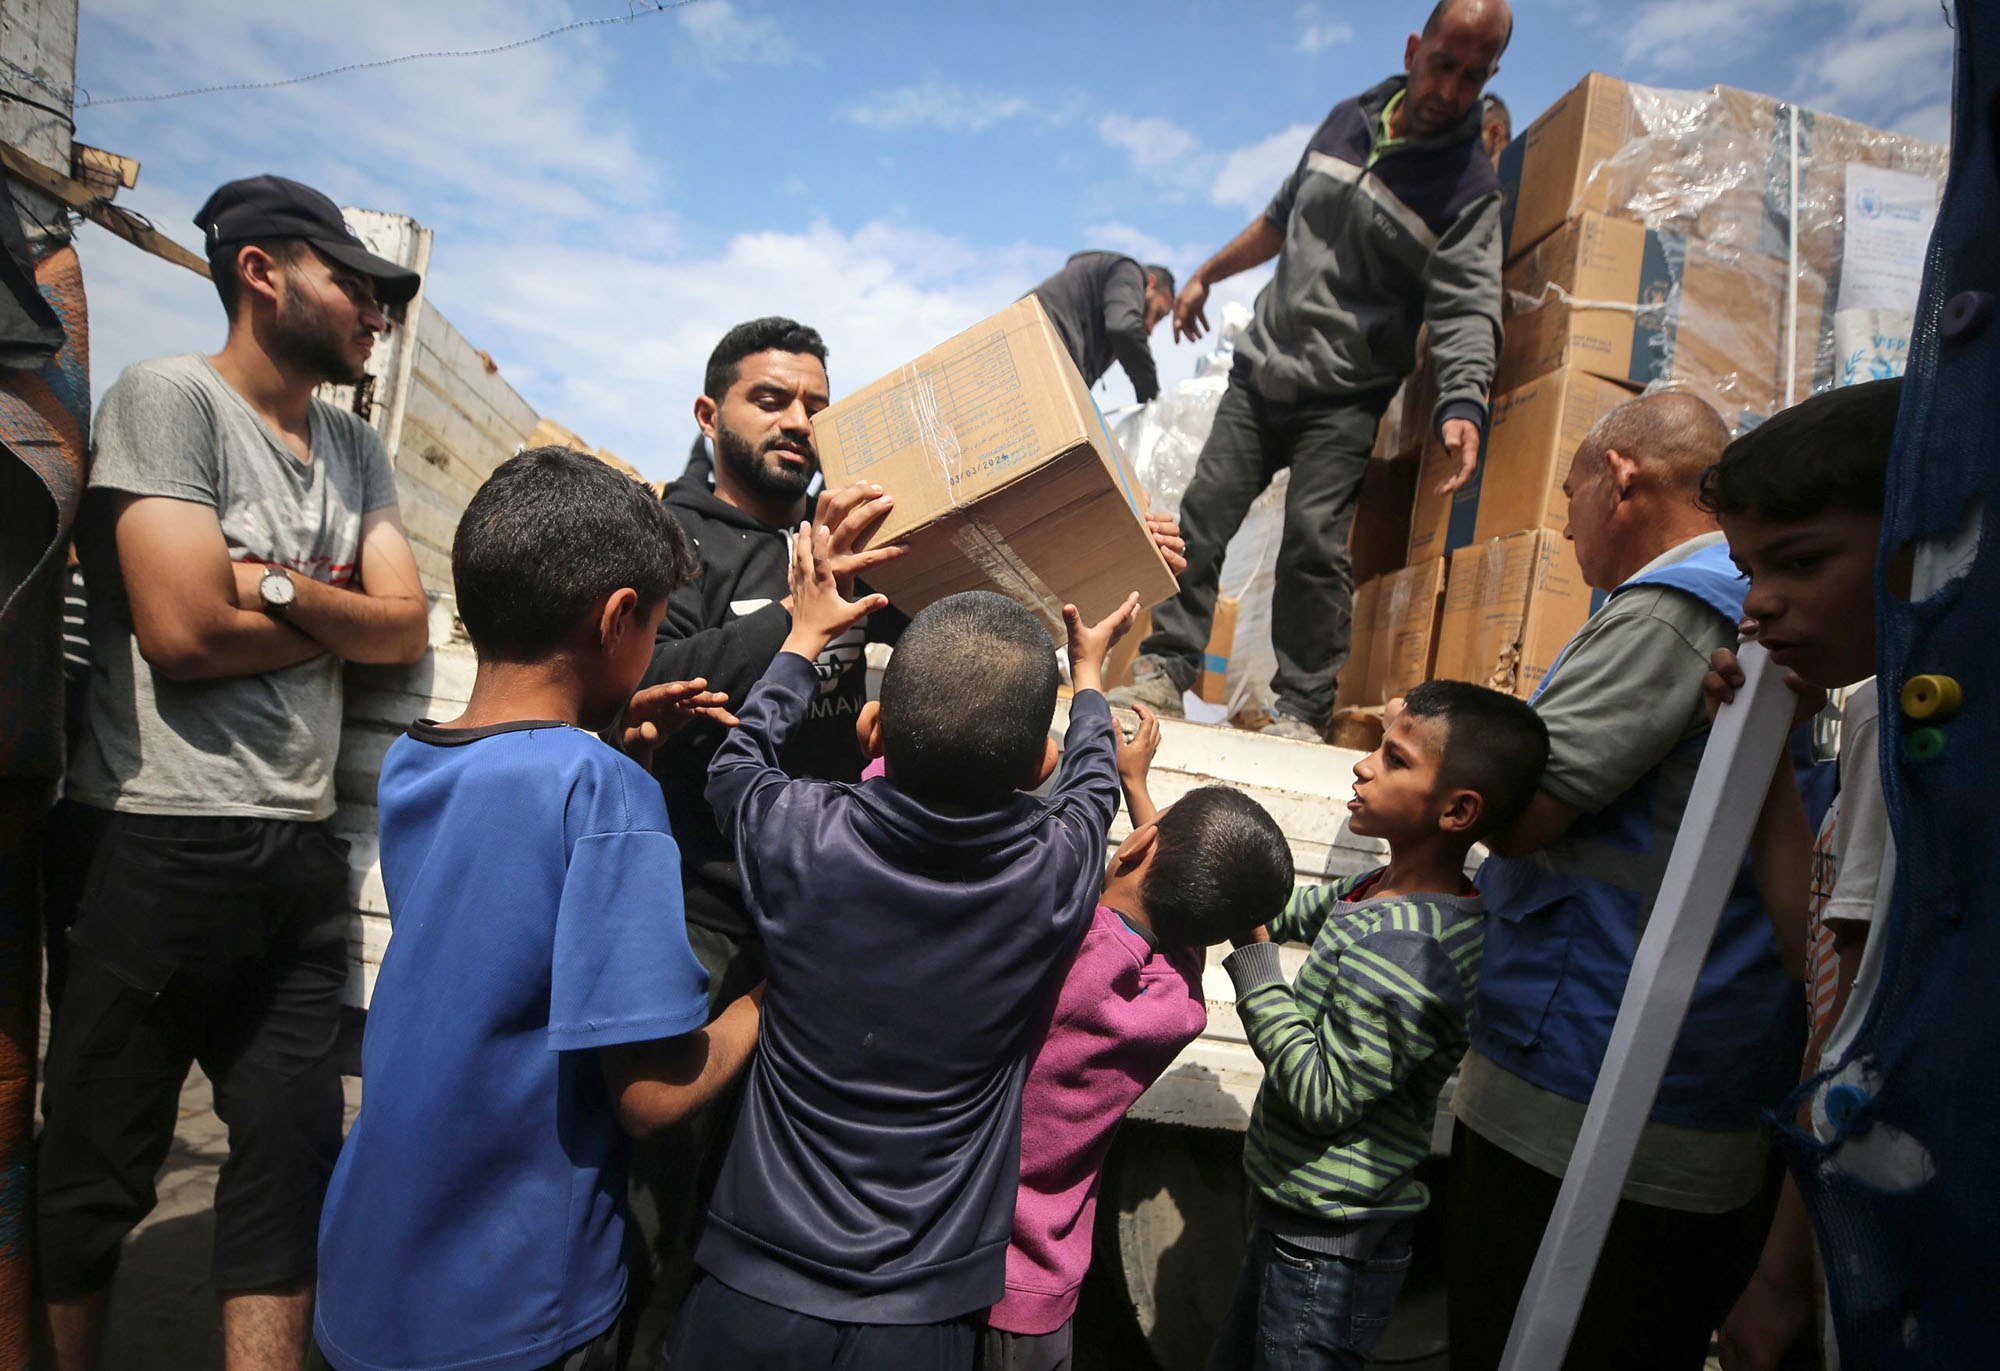 A Palestinian is carrying boxes of aid distributed before the Eid al-Fitr holiday in Deir Al-Balah, Gaza, on April 8.